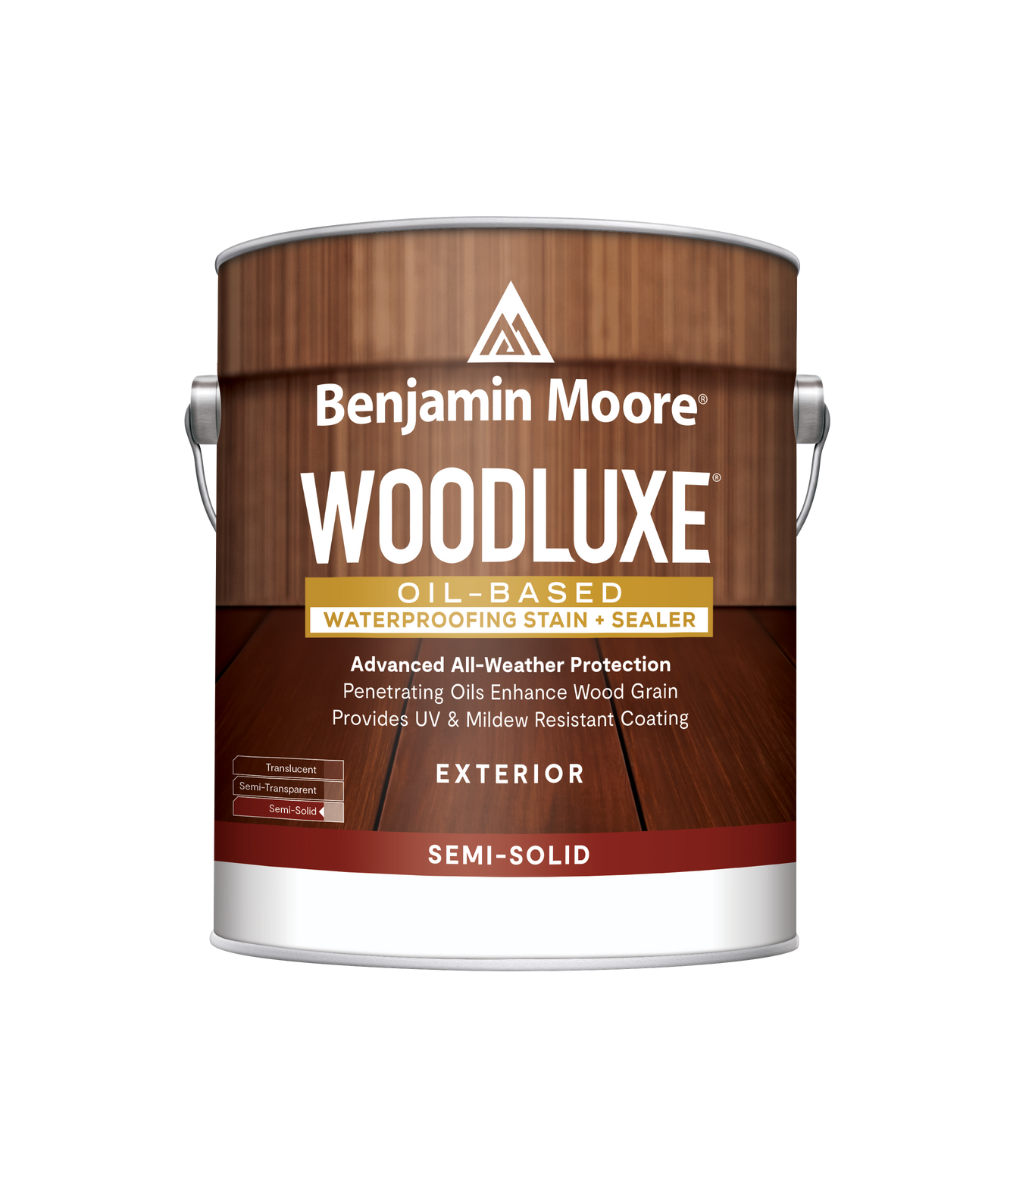 Benjamin Moore Woodluxe® Oil-Based Semi-Solid Exterior Stain available to shop at Regal Paint Centers in Maryland, Virginia and DC.